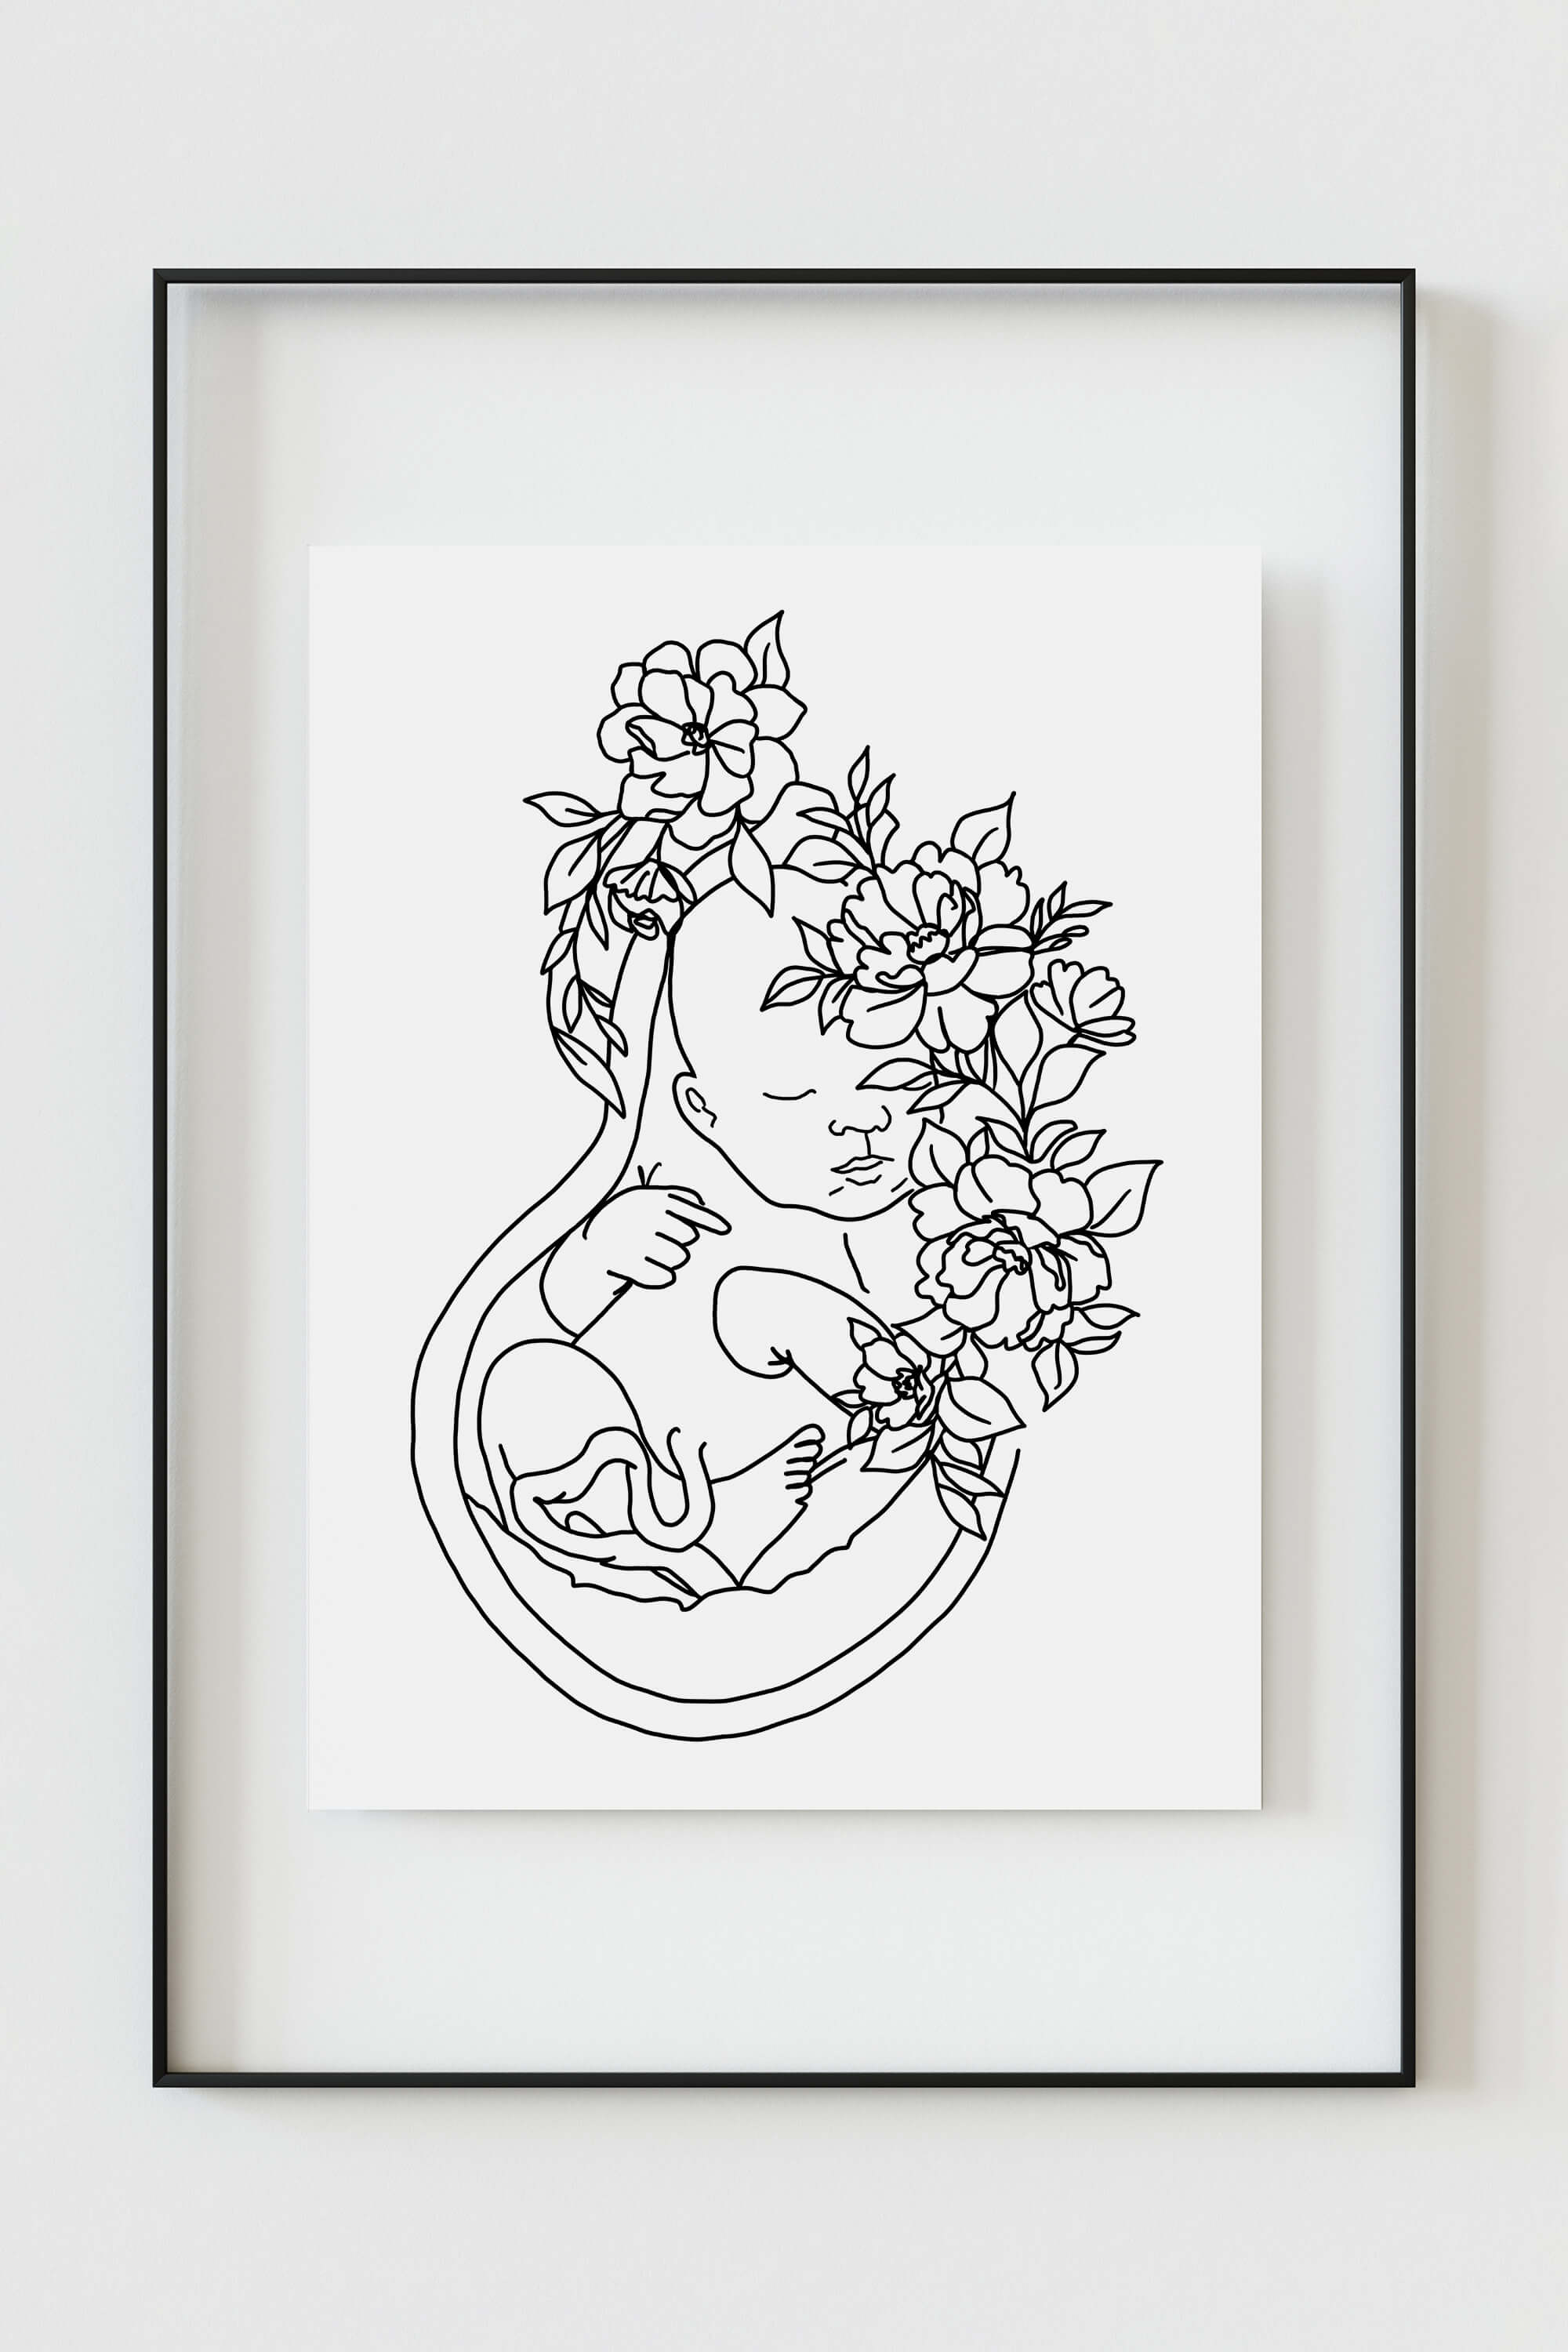 Monochrome floral womb line art print, a symbol of refinement and elegance. The black and white tones create a captivating visual contrast, highlighting the intricate details of this sophisticated artwork.